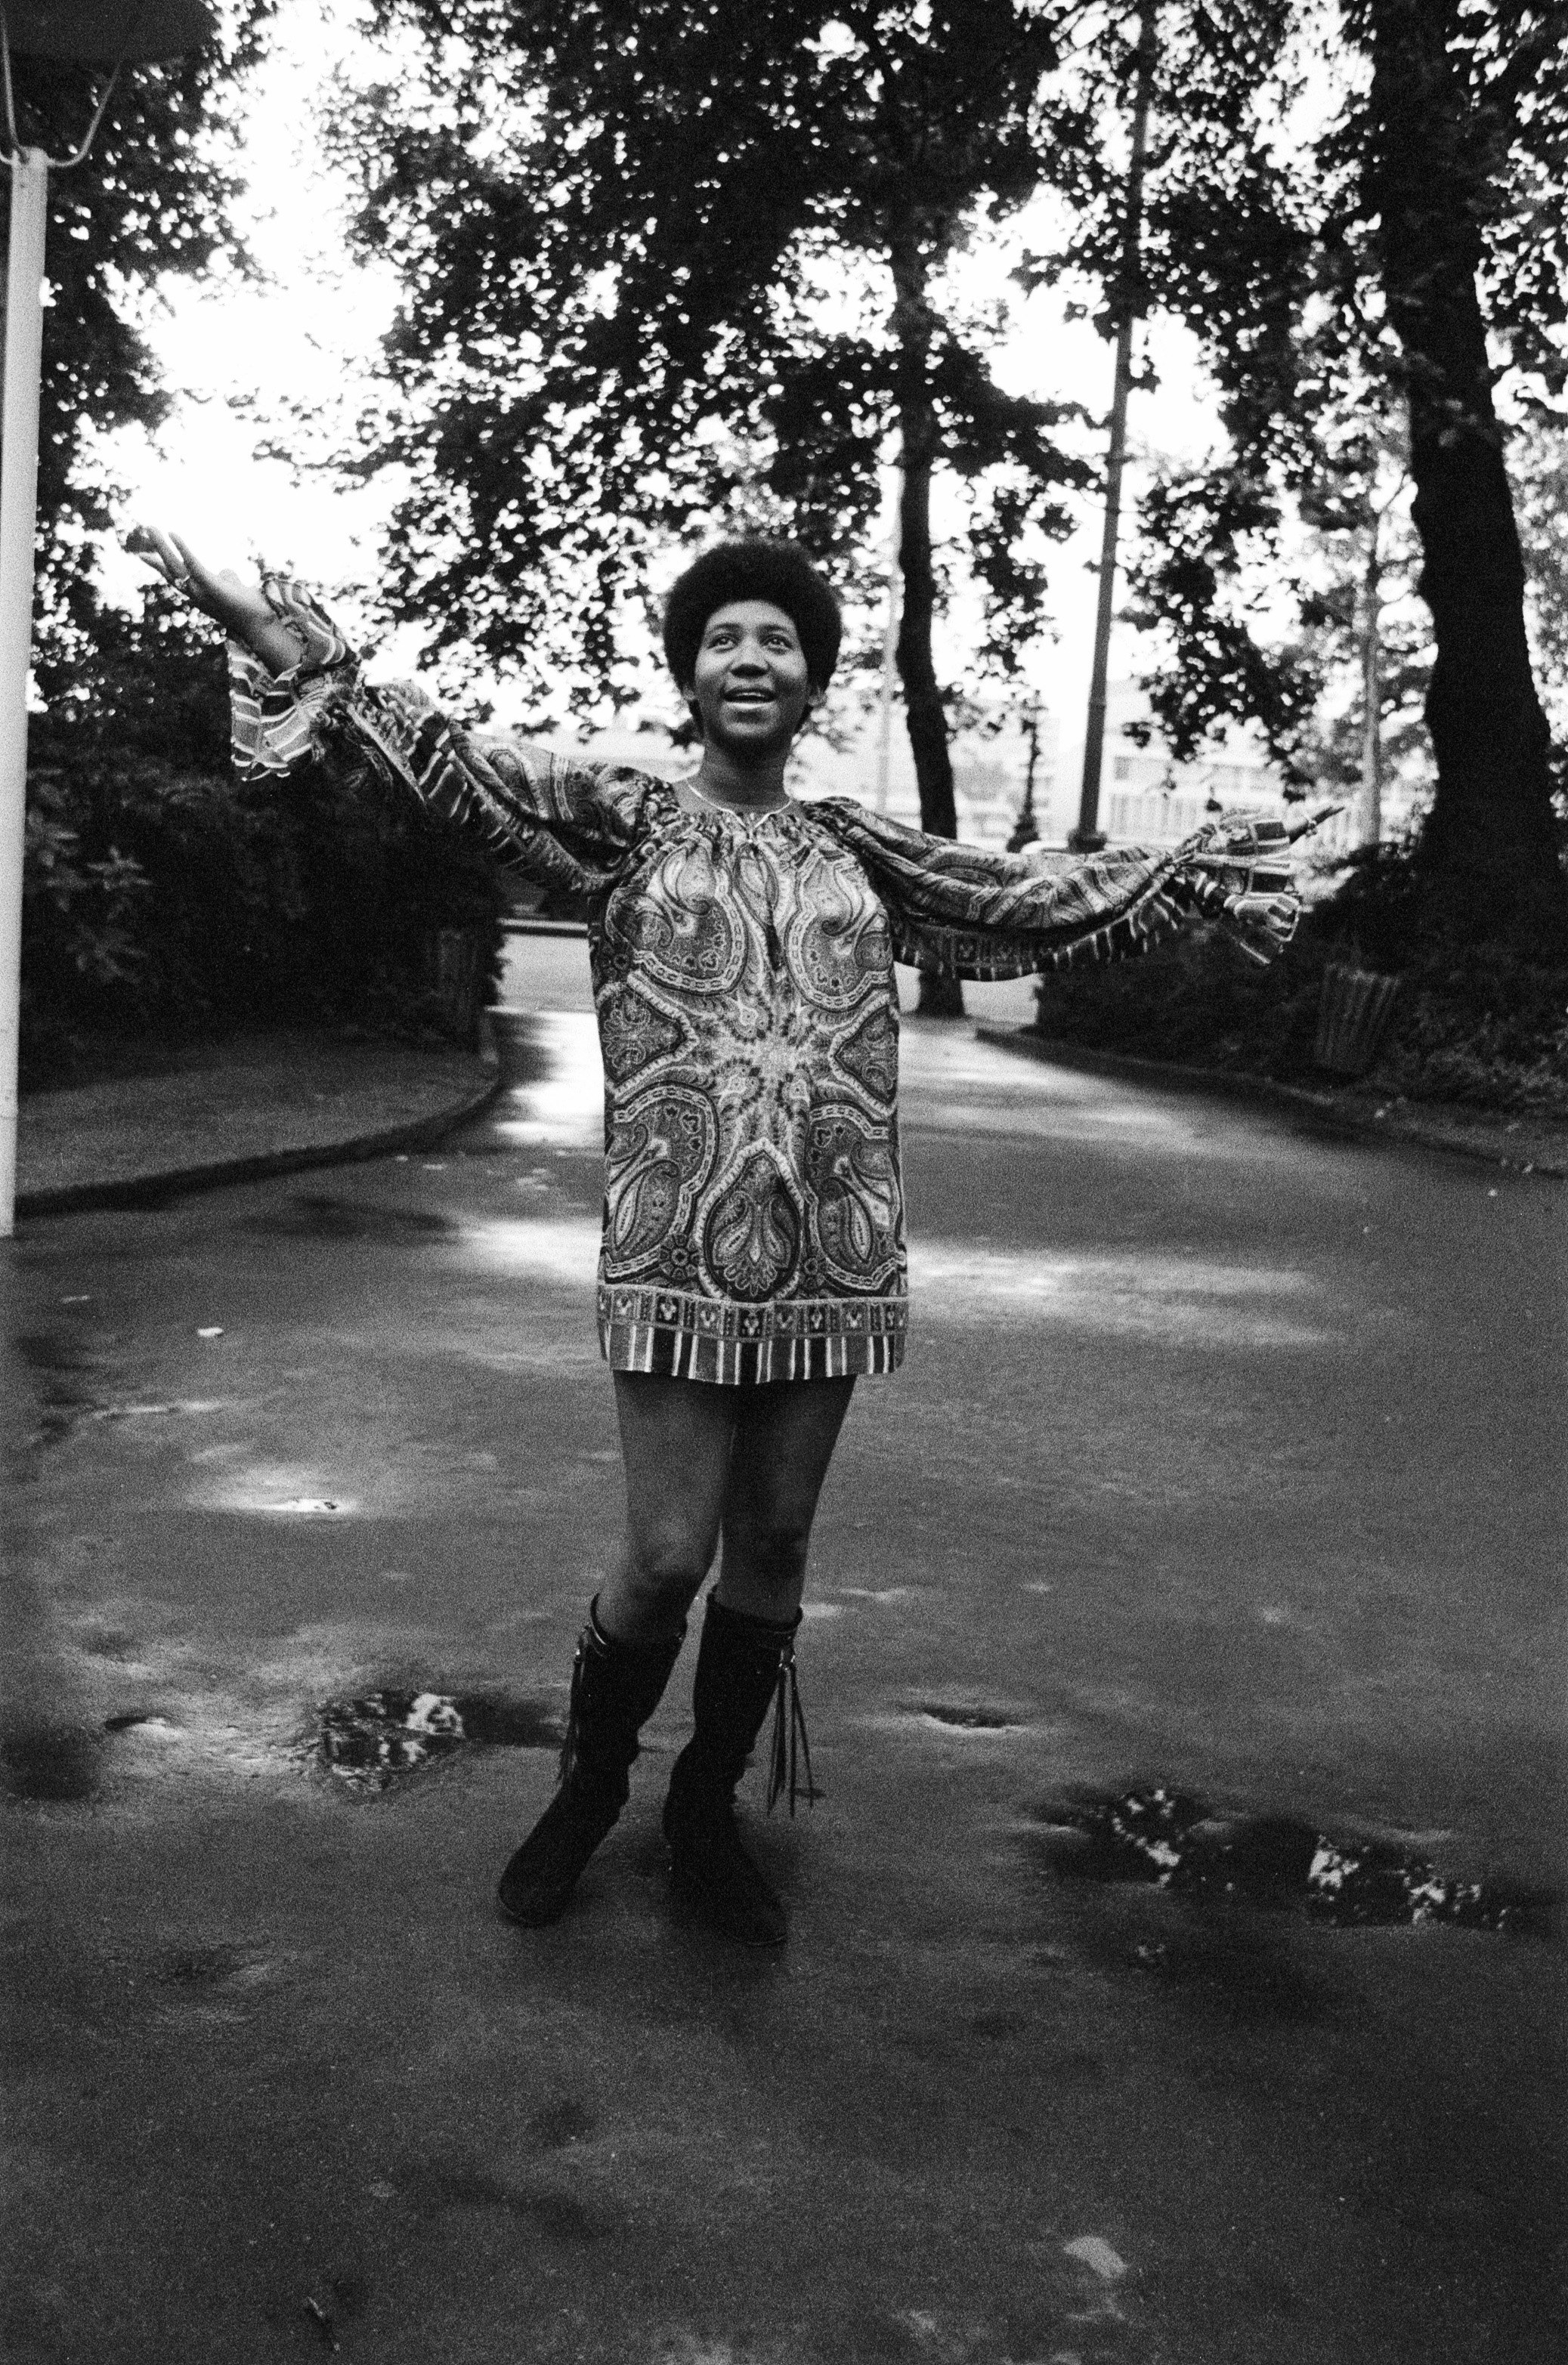 Franklin wearing a bohemian dress and tall boots, happily looking at the sky